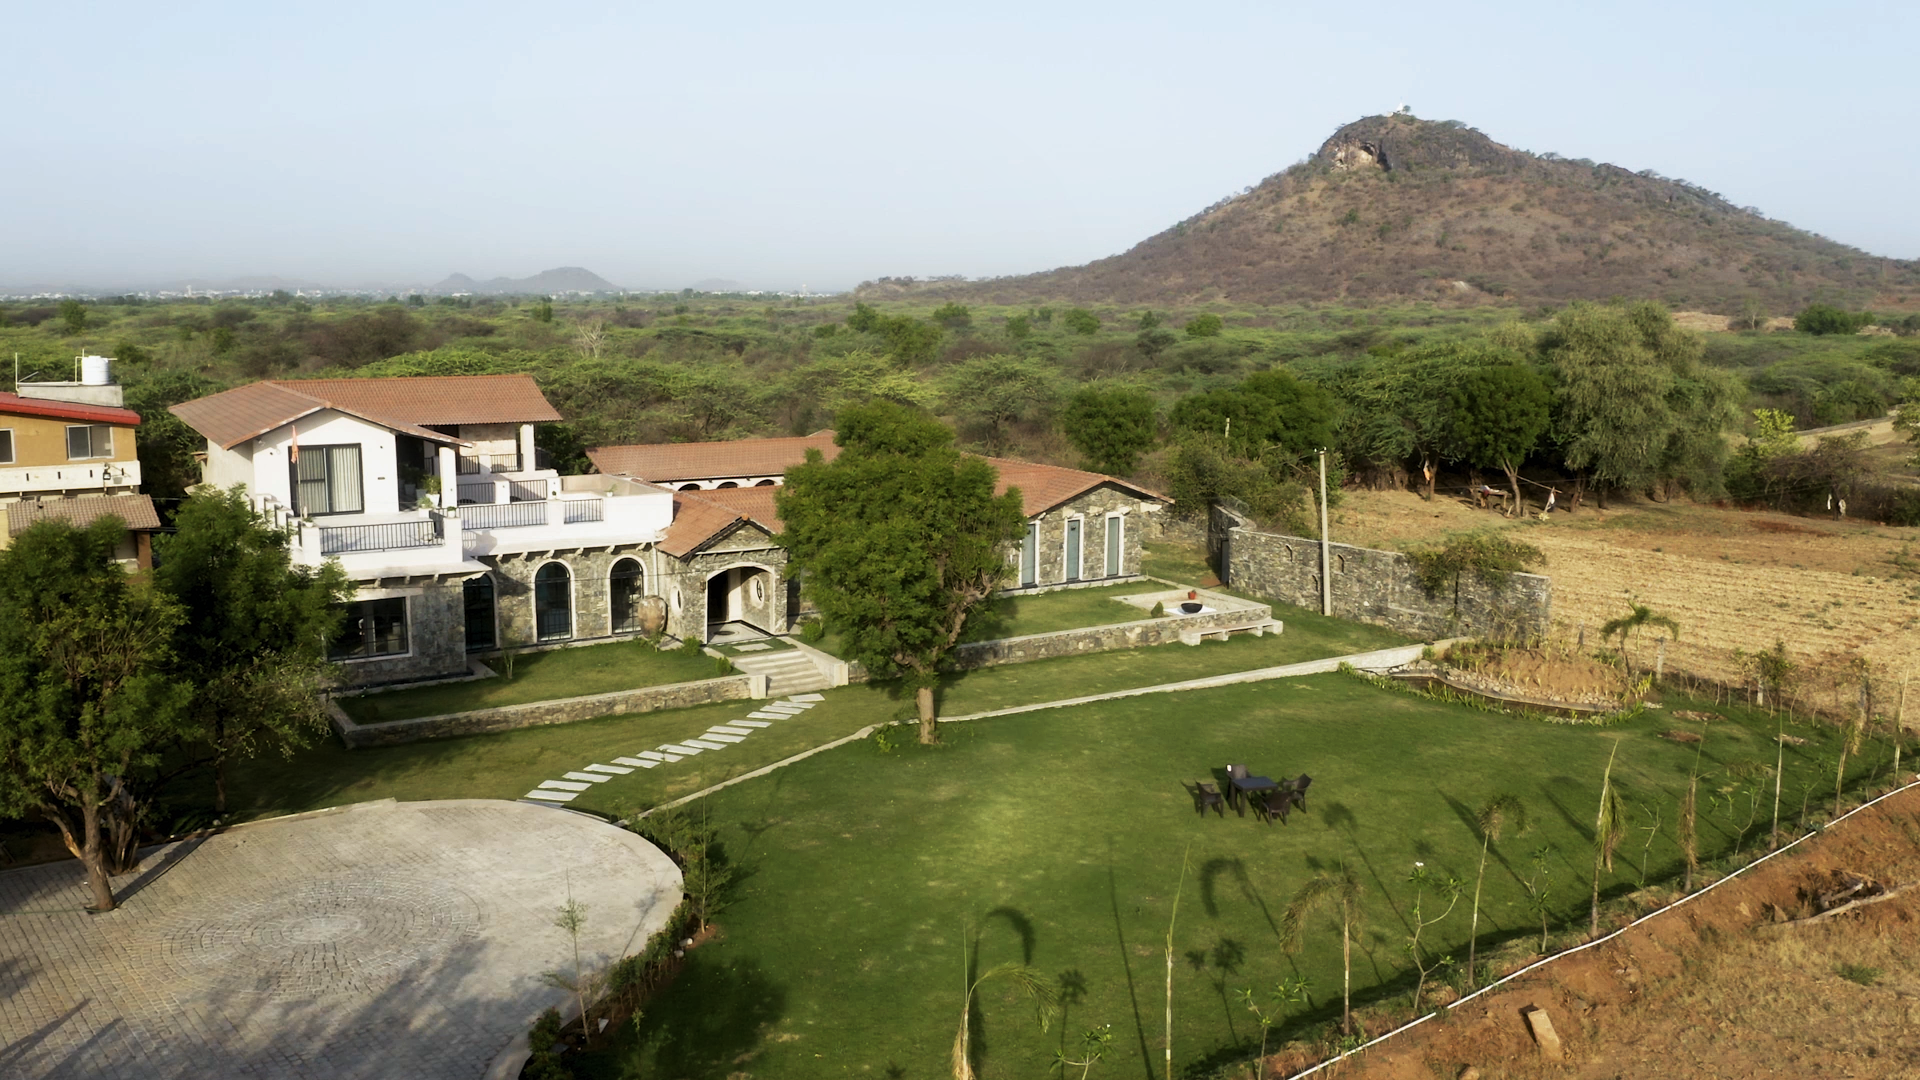 Poetry Slam: A 15,000 sq. ft. Rajasthan Home Recites Verses on Sustainability Tucked in its Stone Walls